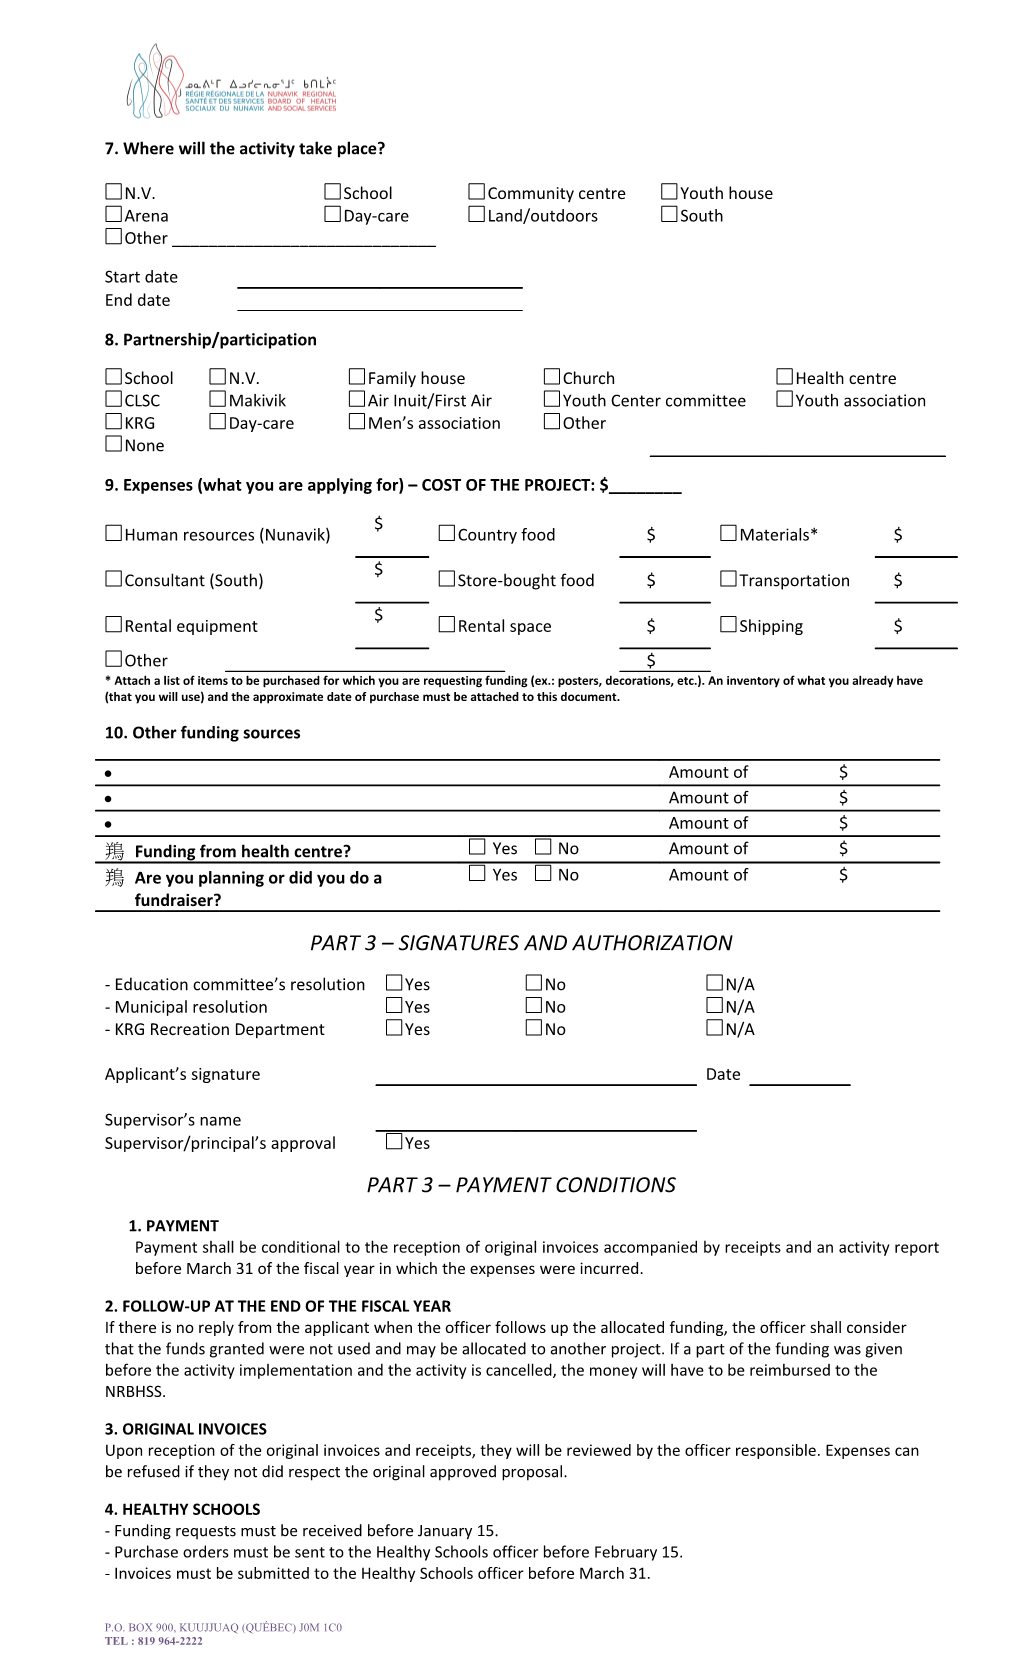 Application Form for Funding